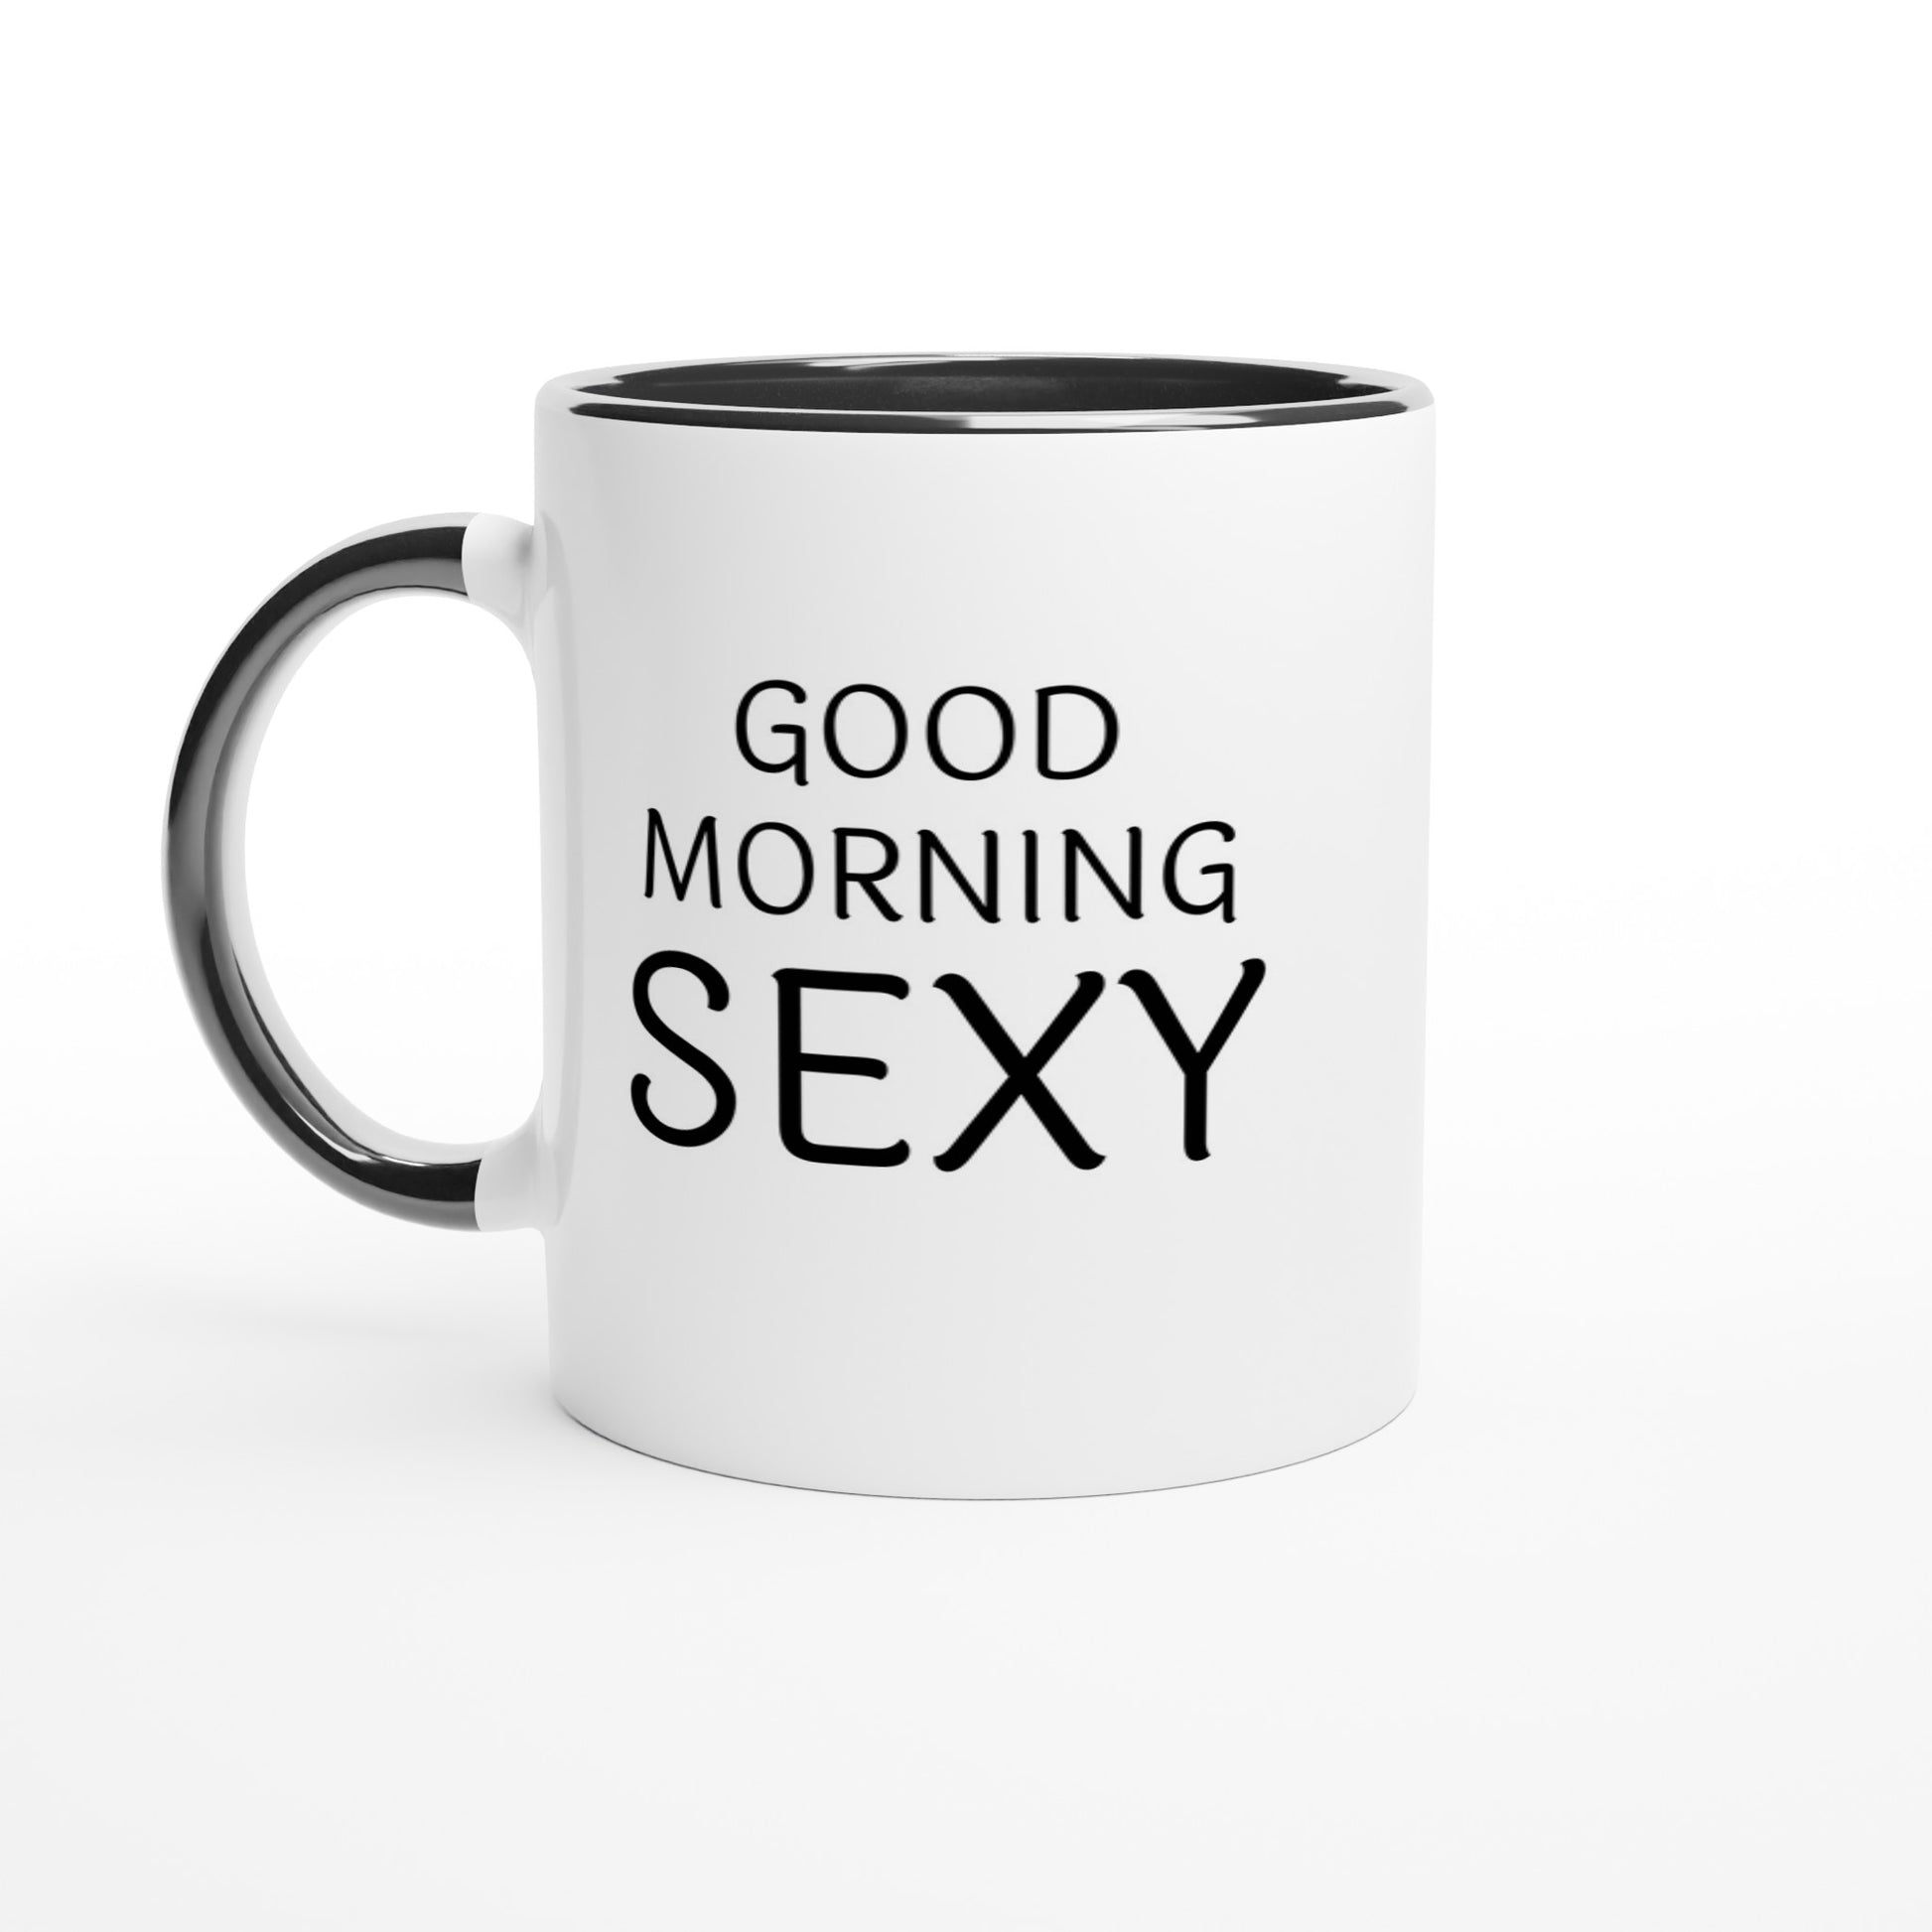 Good Morning S*xy - Colored – The Dirty Mug Co